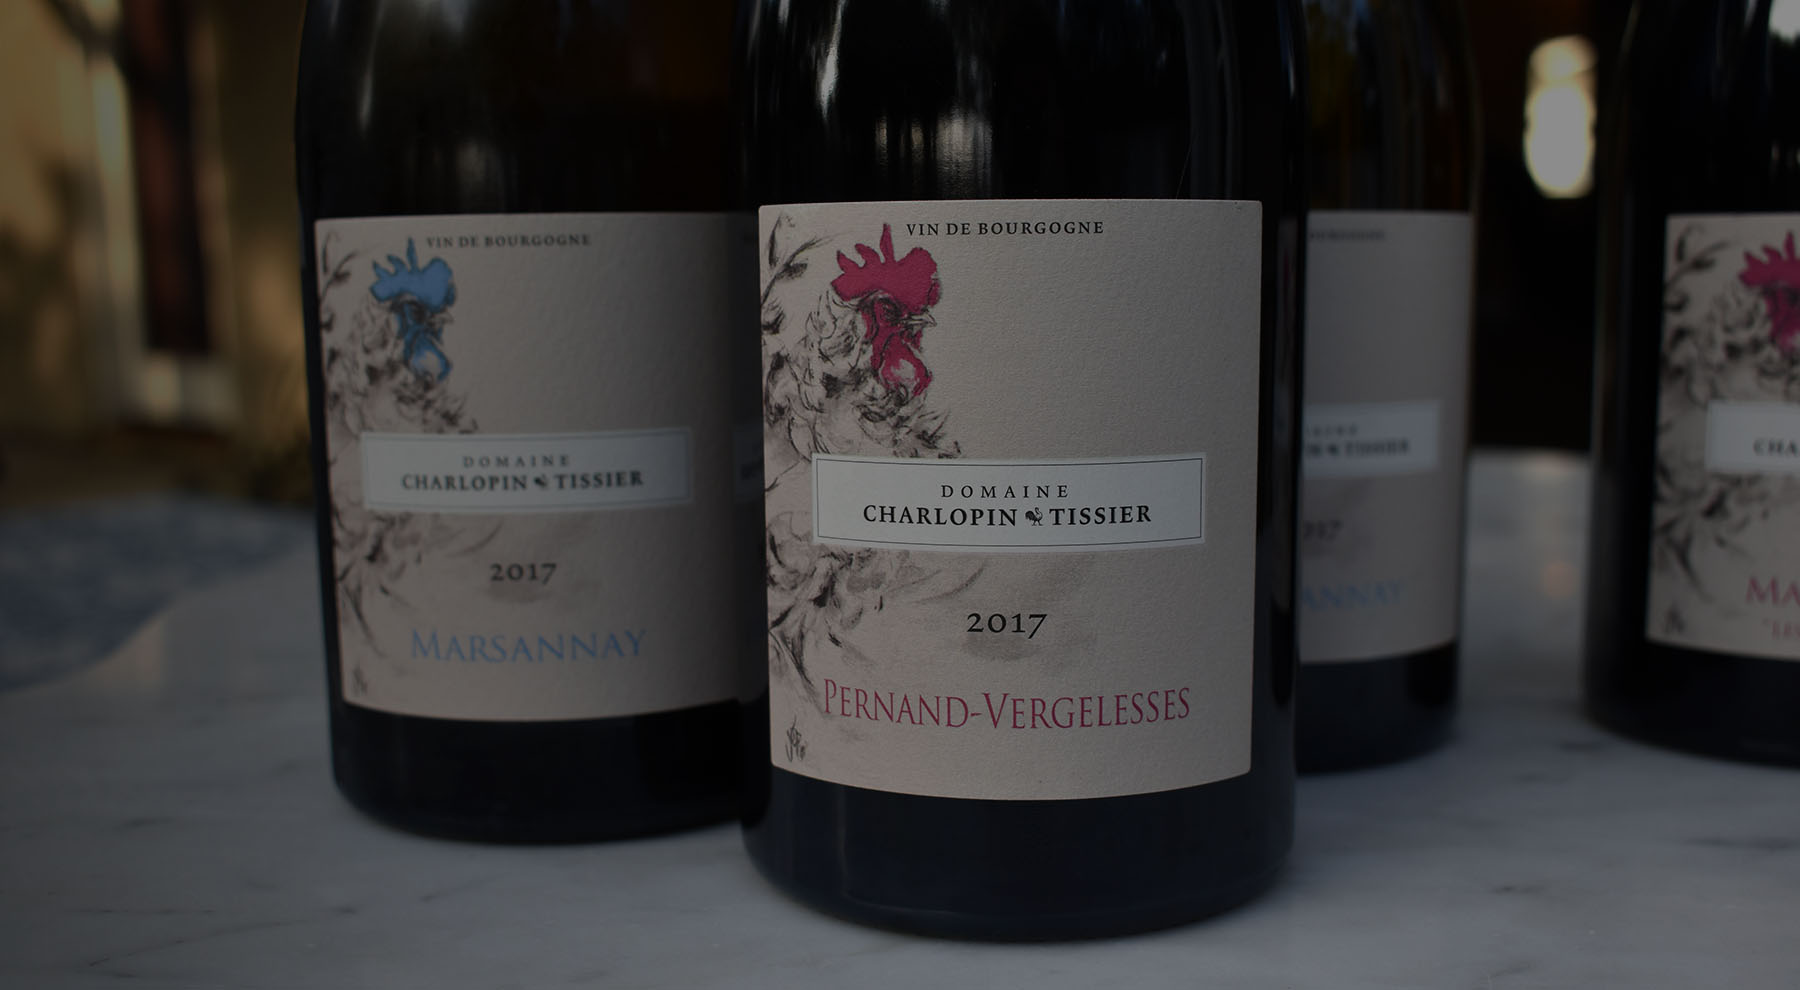 New arrivals from Domaine Charlopin-Tissier